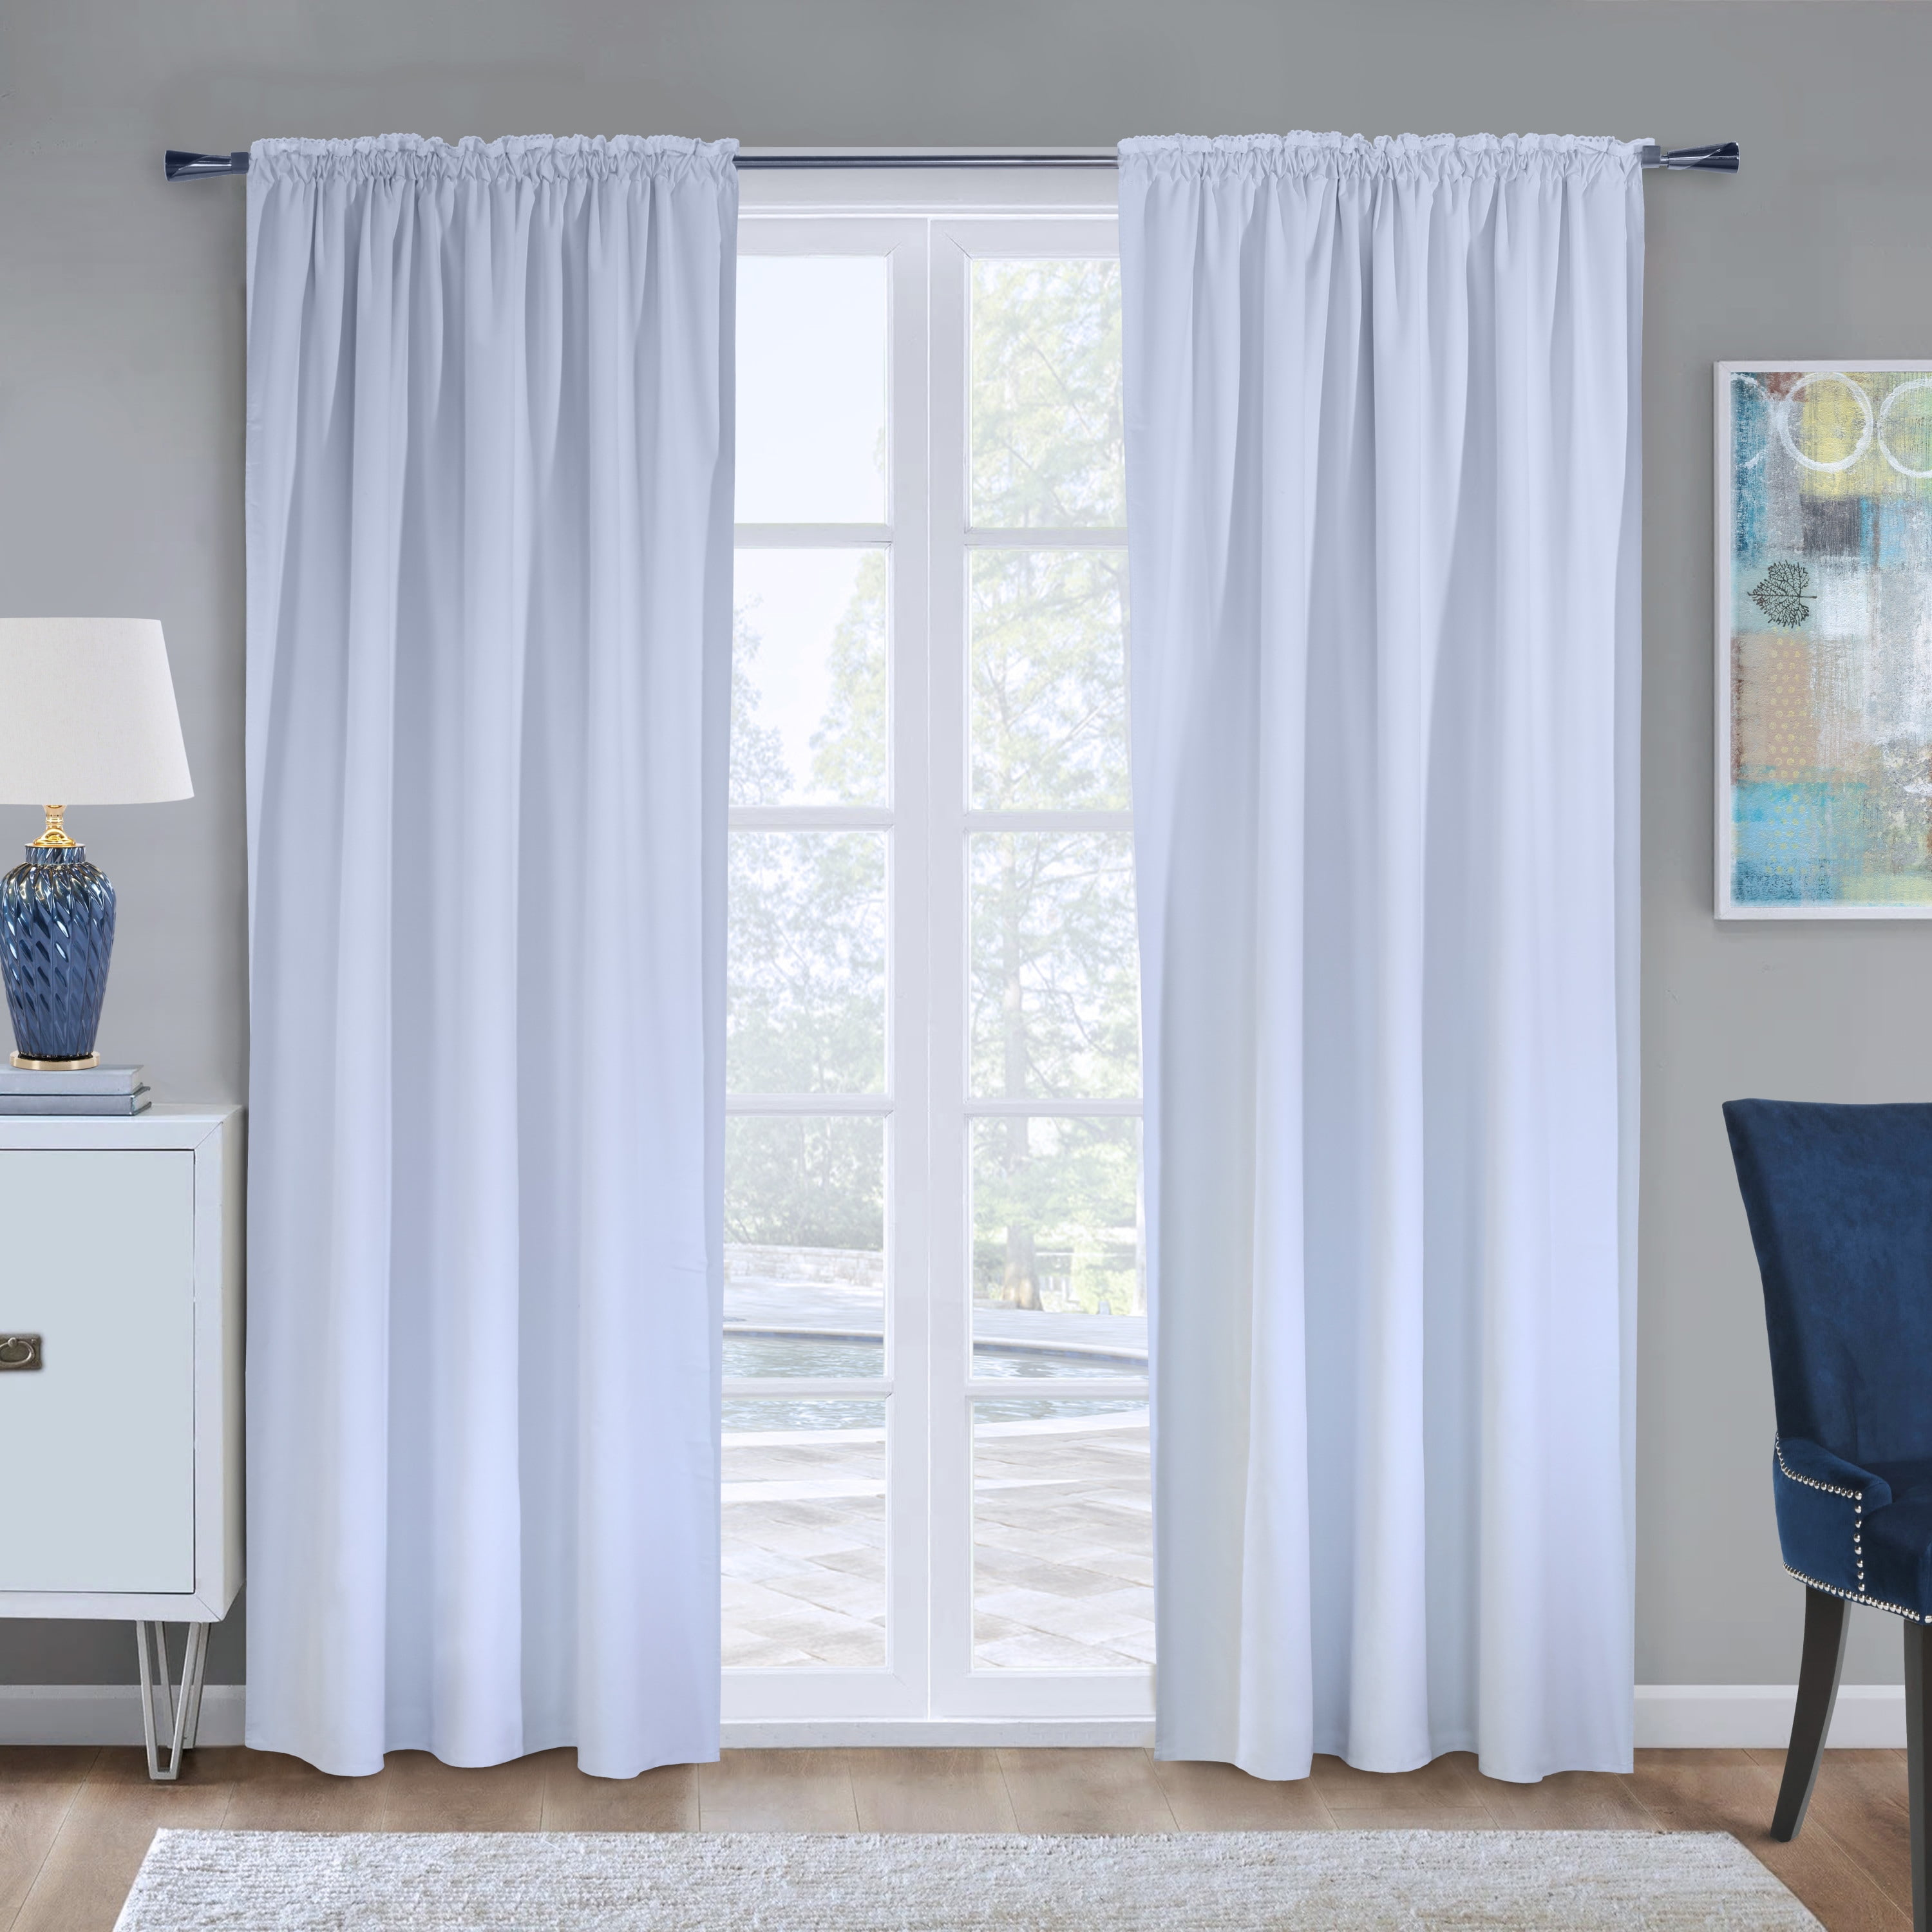 Deconovo Home Decorative Diamond Foil Printed Curtains Room Darkening Eyelet Curtains Blackout Curtains for Boys Room W55 x L95 Inch Grey One Pair 